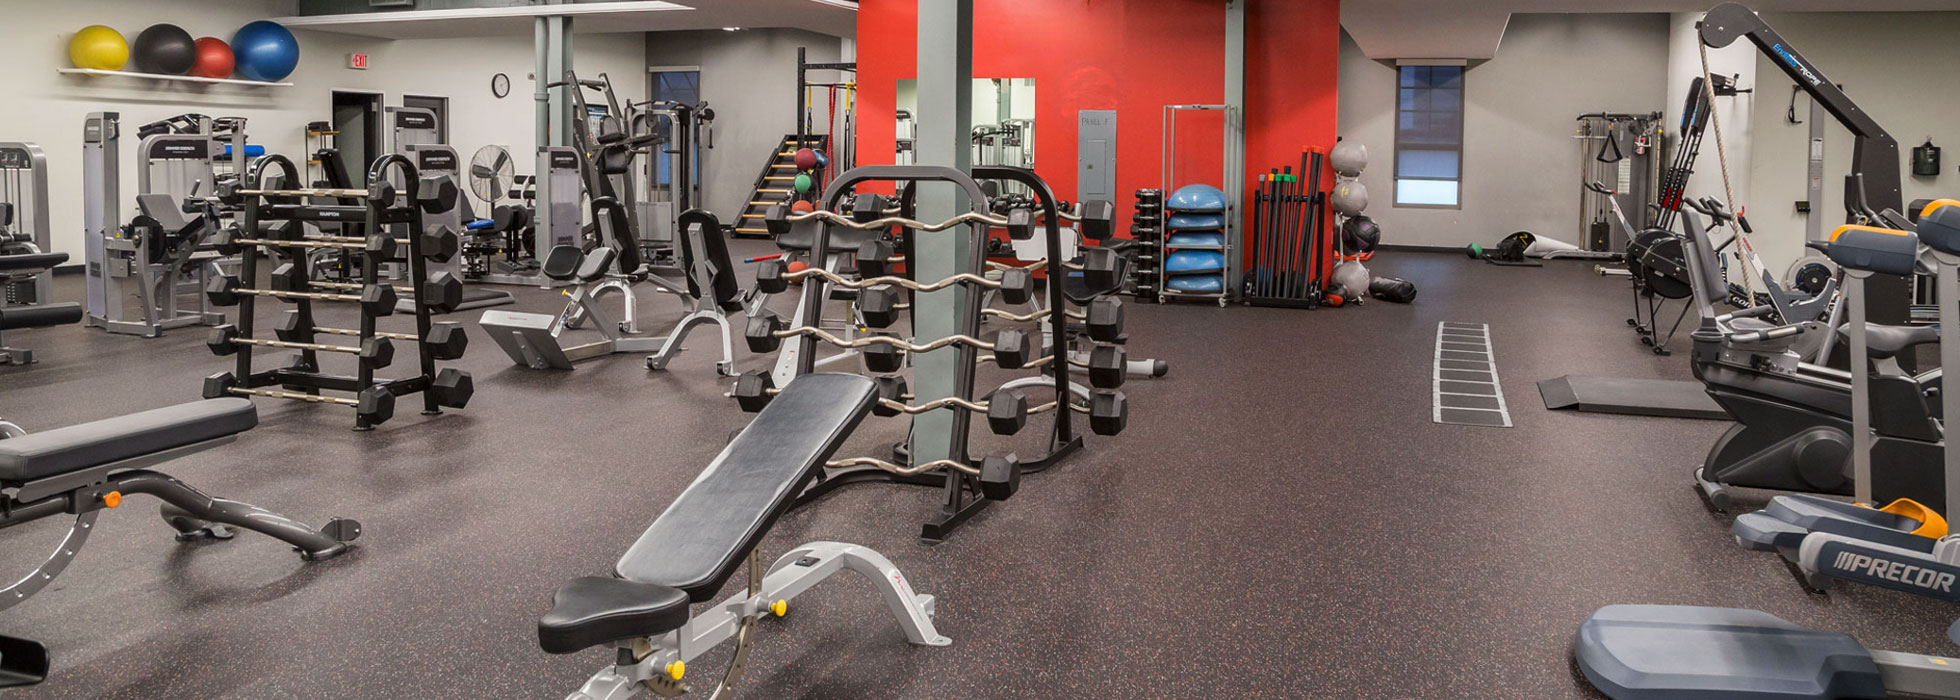 A Gym Near Meyerland That Can Help With Weight Loss